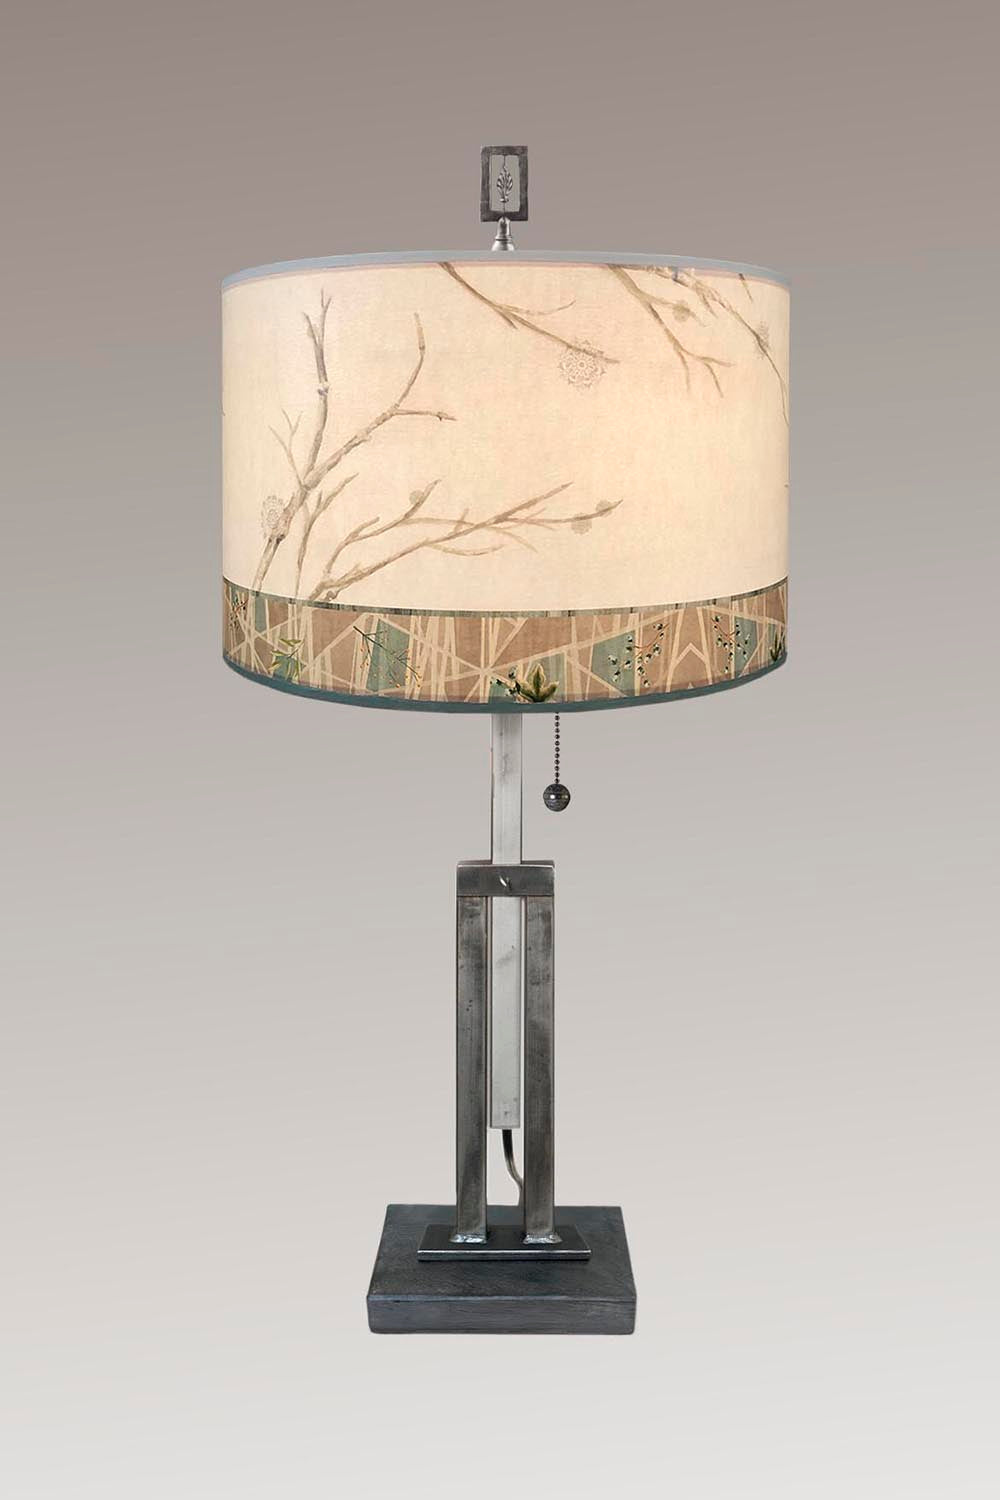 Janna Ugone &amp; Co Table Lamps Adjustable-Height Steel Table Lamp with Large Drum Shade in Prism Branch